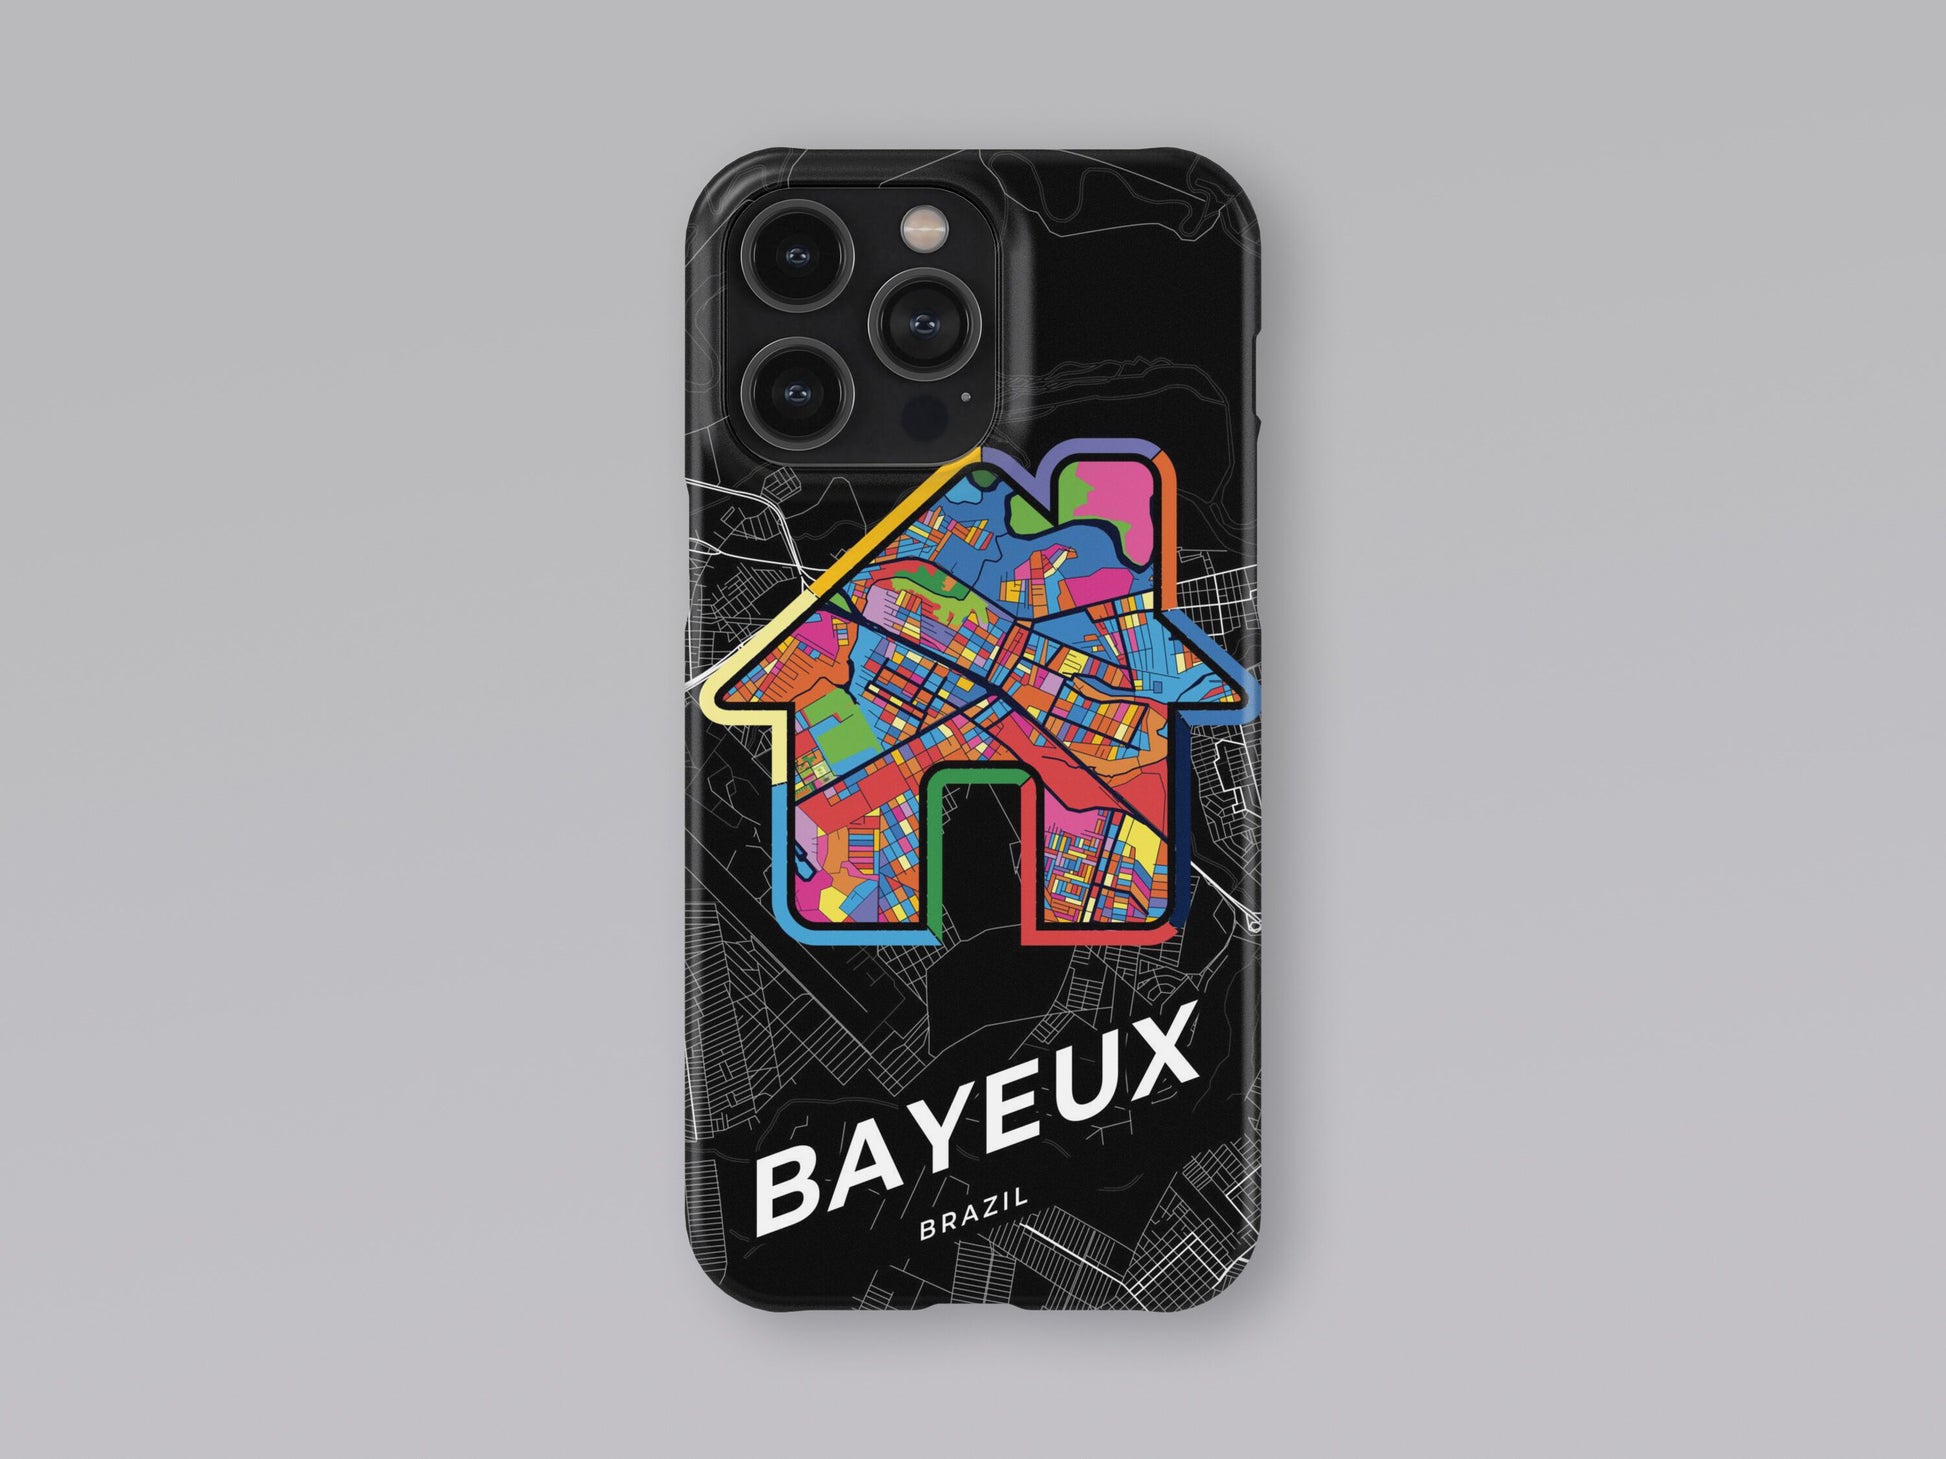 Bayeux Brazil slim phone case with colorful icon. Birthday, wedding or housewarming gift. Couple match cases. 3